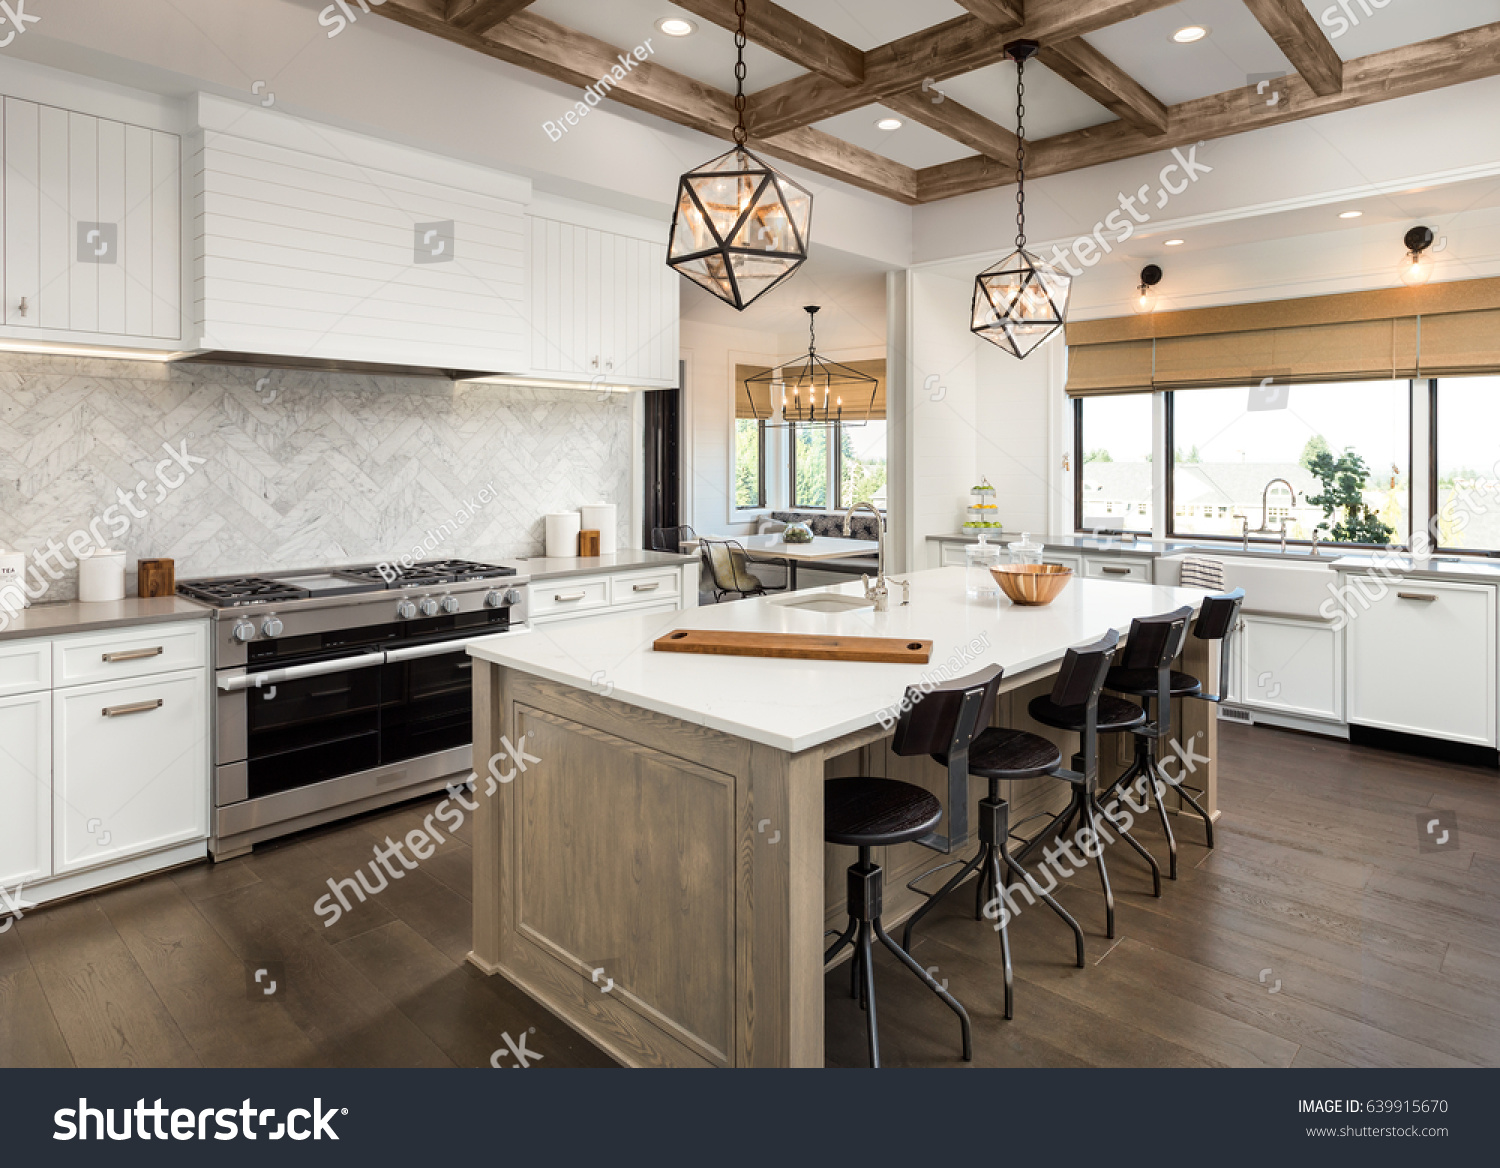 Kitchen Interior with Island, Sink, Cabinets, and Hardwood Floors in New Luxury Home. Features Elegant Pendant Light Fixtures, and Farmhouse Sink next to Window #639915670